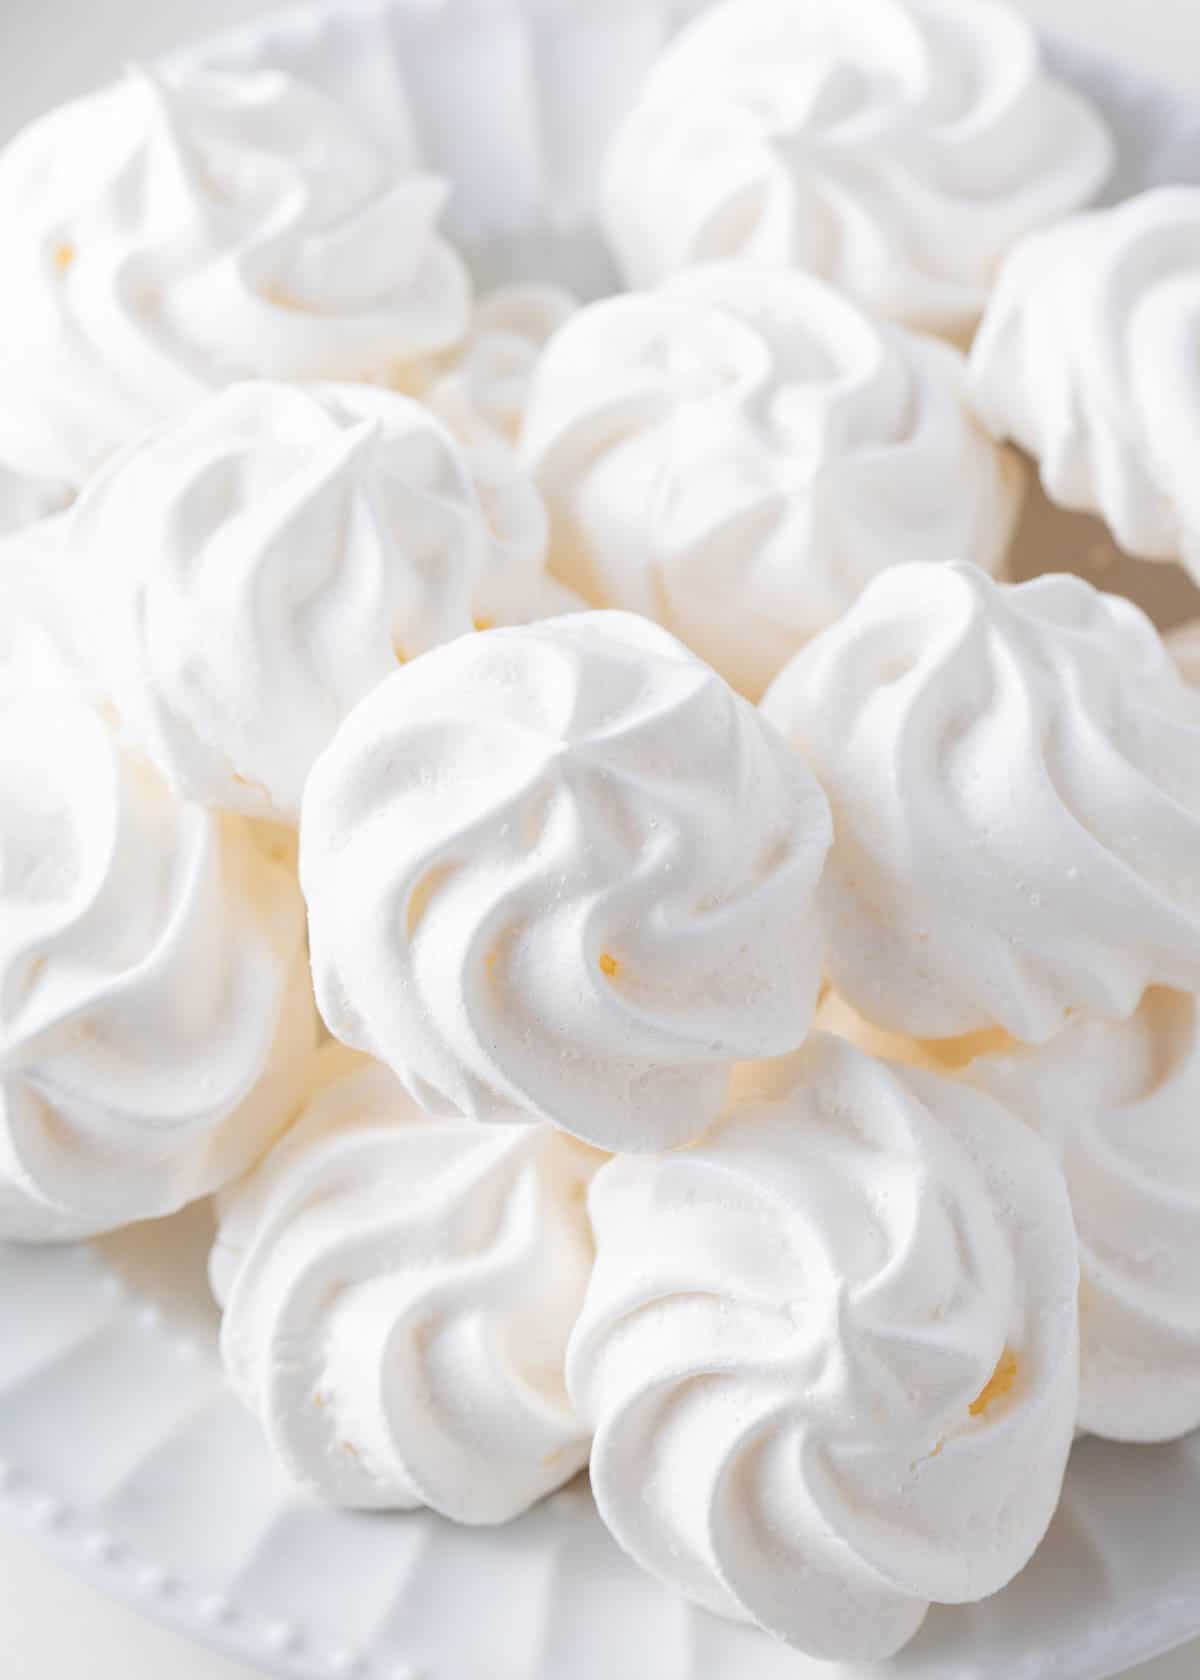 Meringue cookies stacked on a plate.